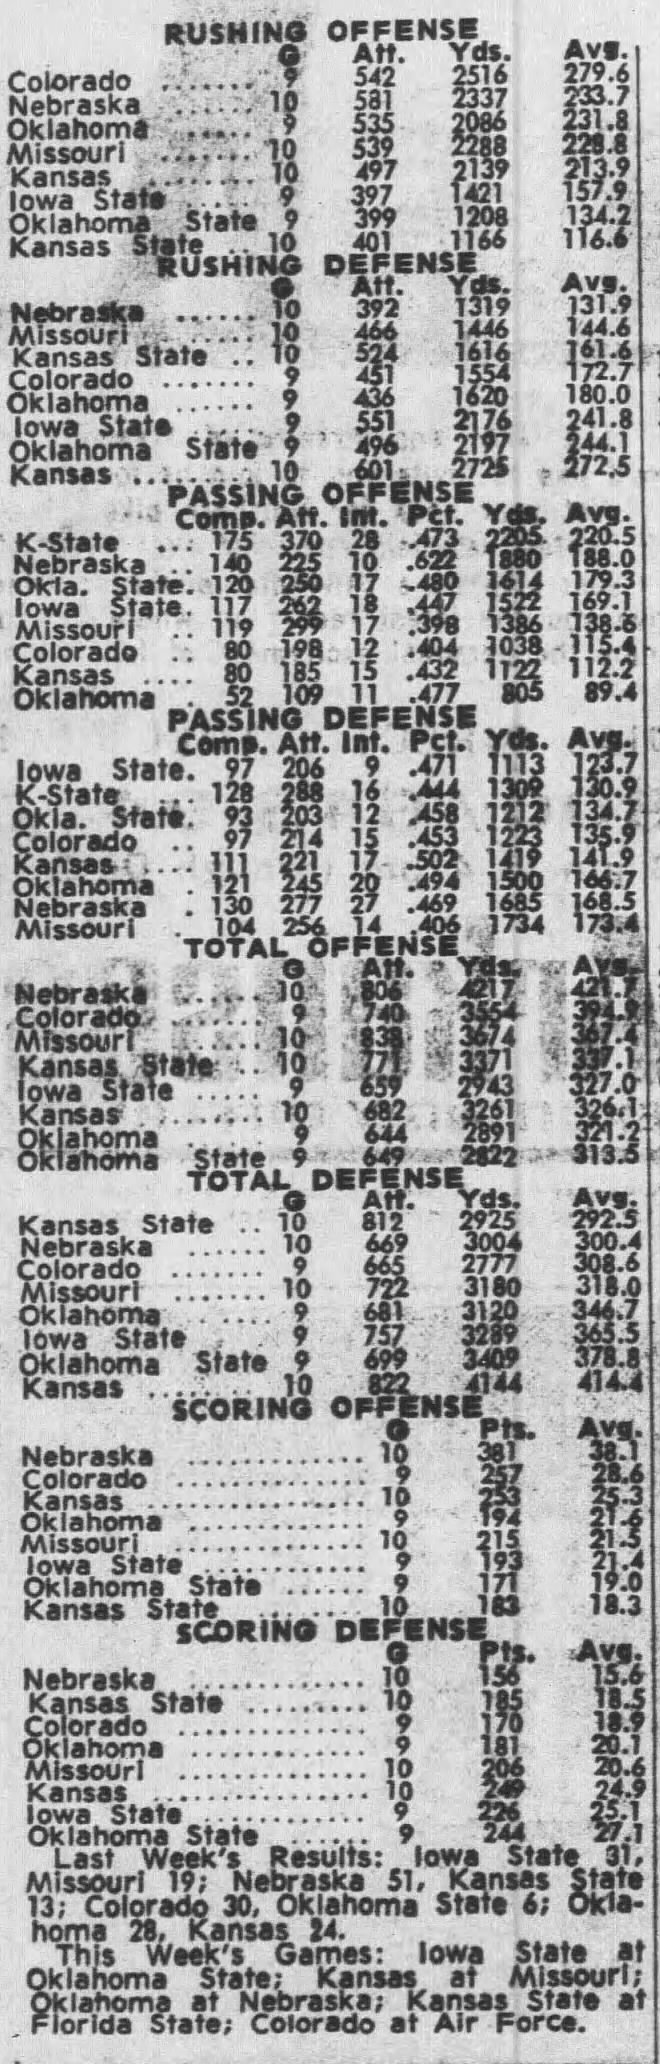 1971 Big Eight 10-game team stats